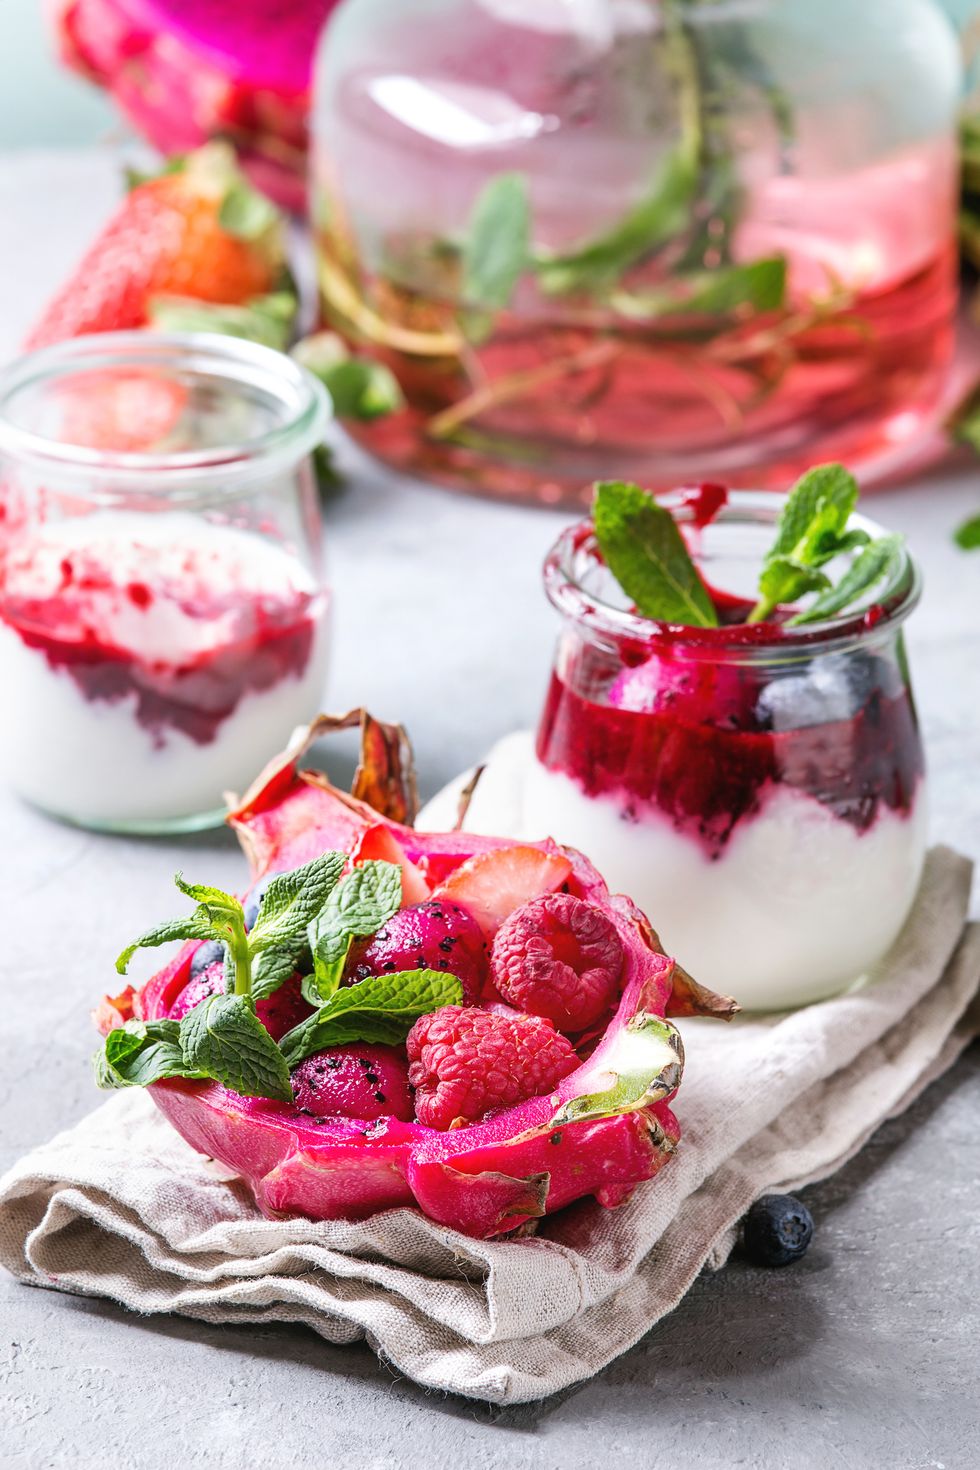 vegan fruit salad with berries and mint served in pink dragon fruit on cloth with jars of yogurt, bottle of lemonade, ingredients above on grey table close up healthy eating